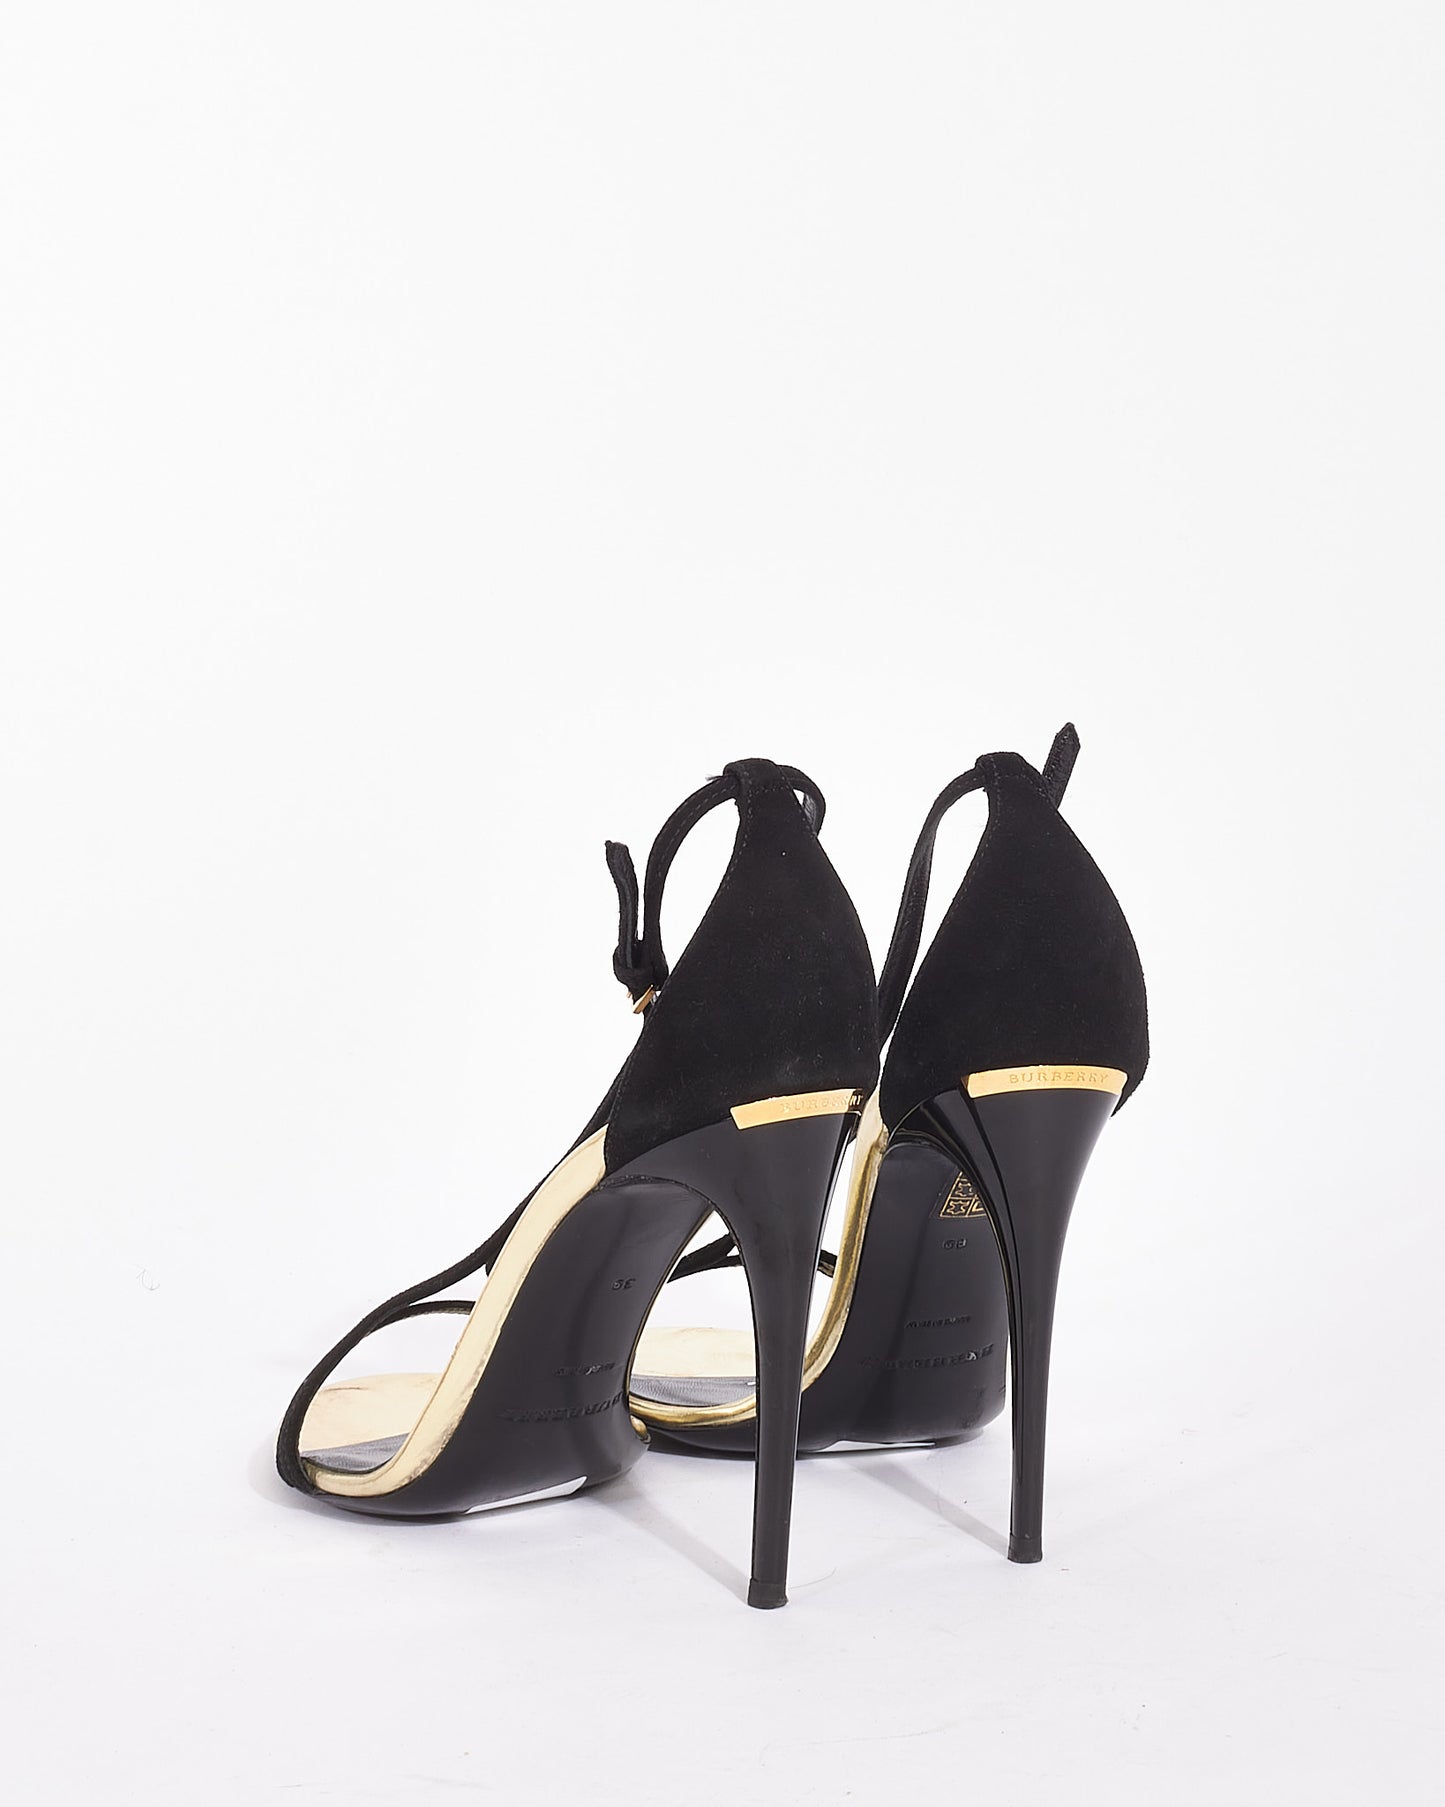 Burberry Black Suede Leather and Gold Stiletto Sandals - 39